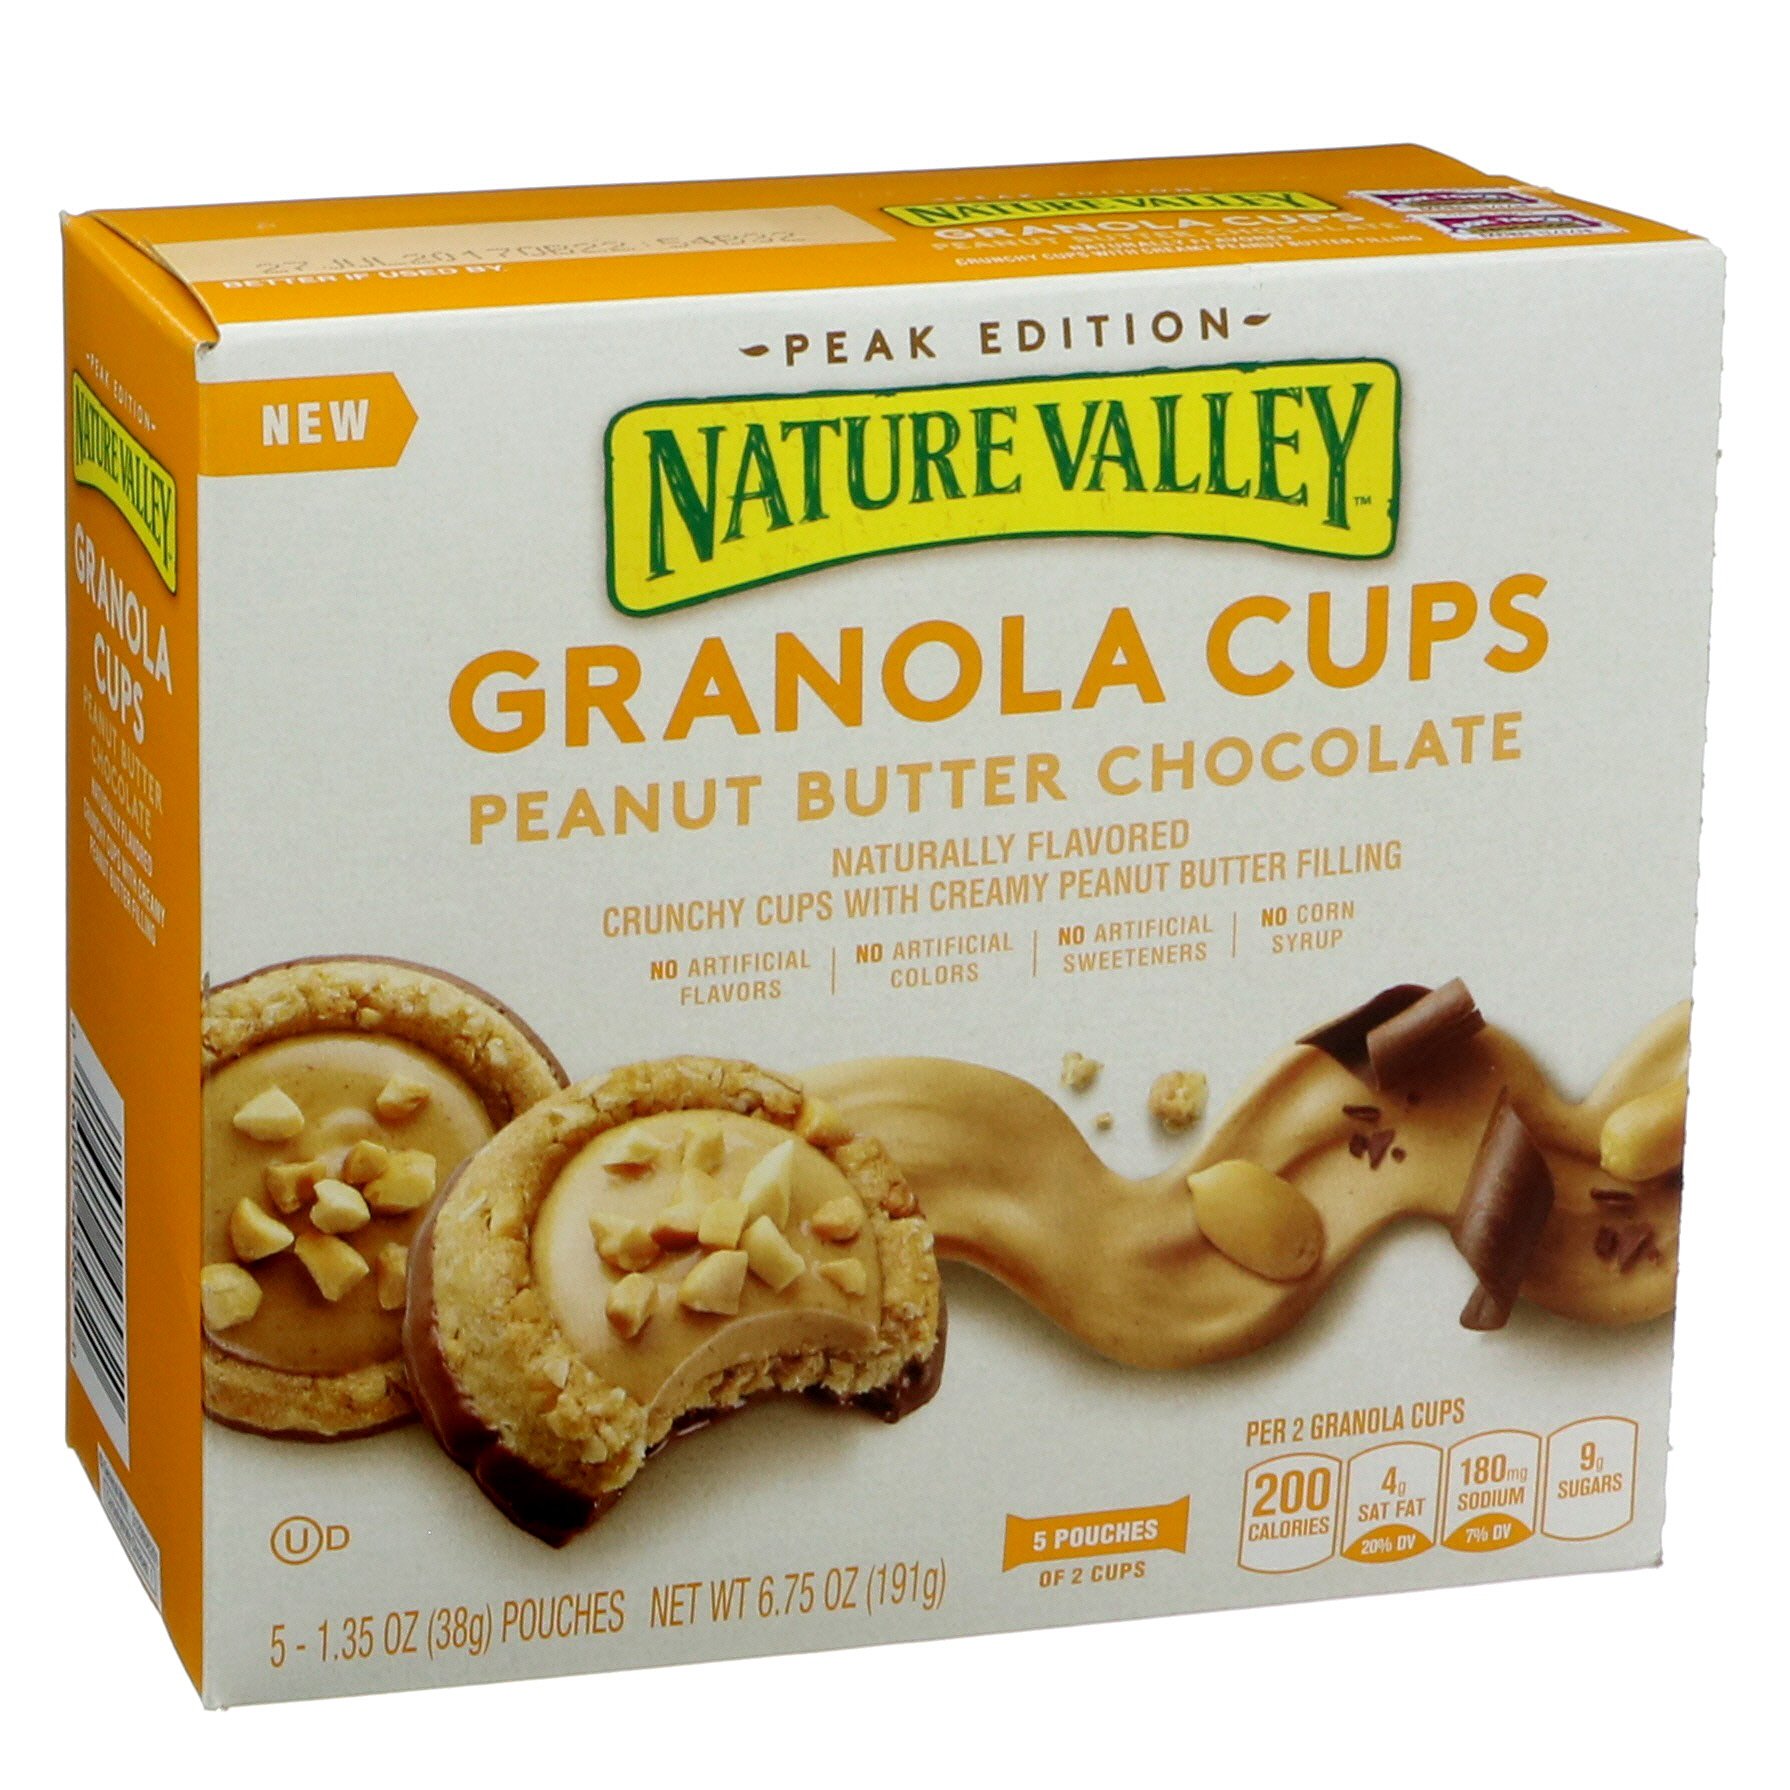 Nature Valley Granola Cups Peanut Butter Chocolate - Shop & Candy at H-E-B